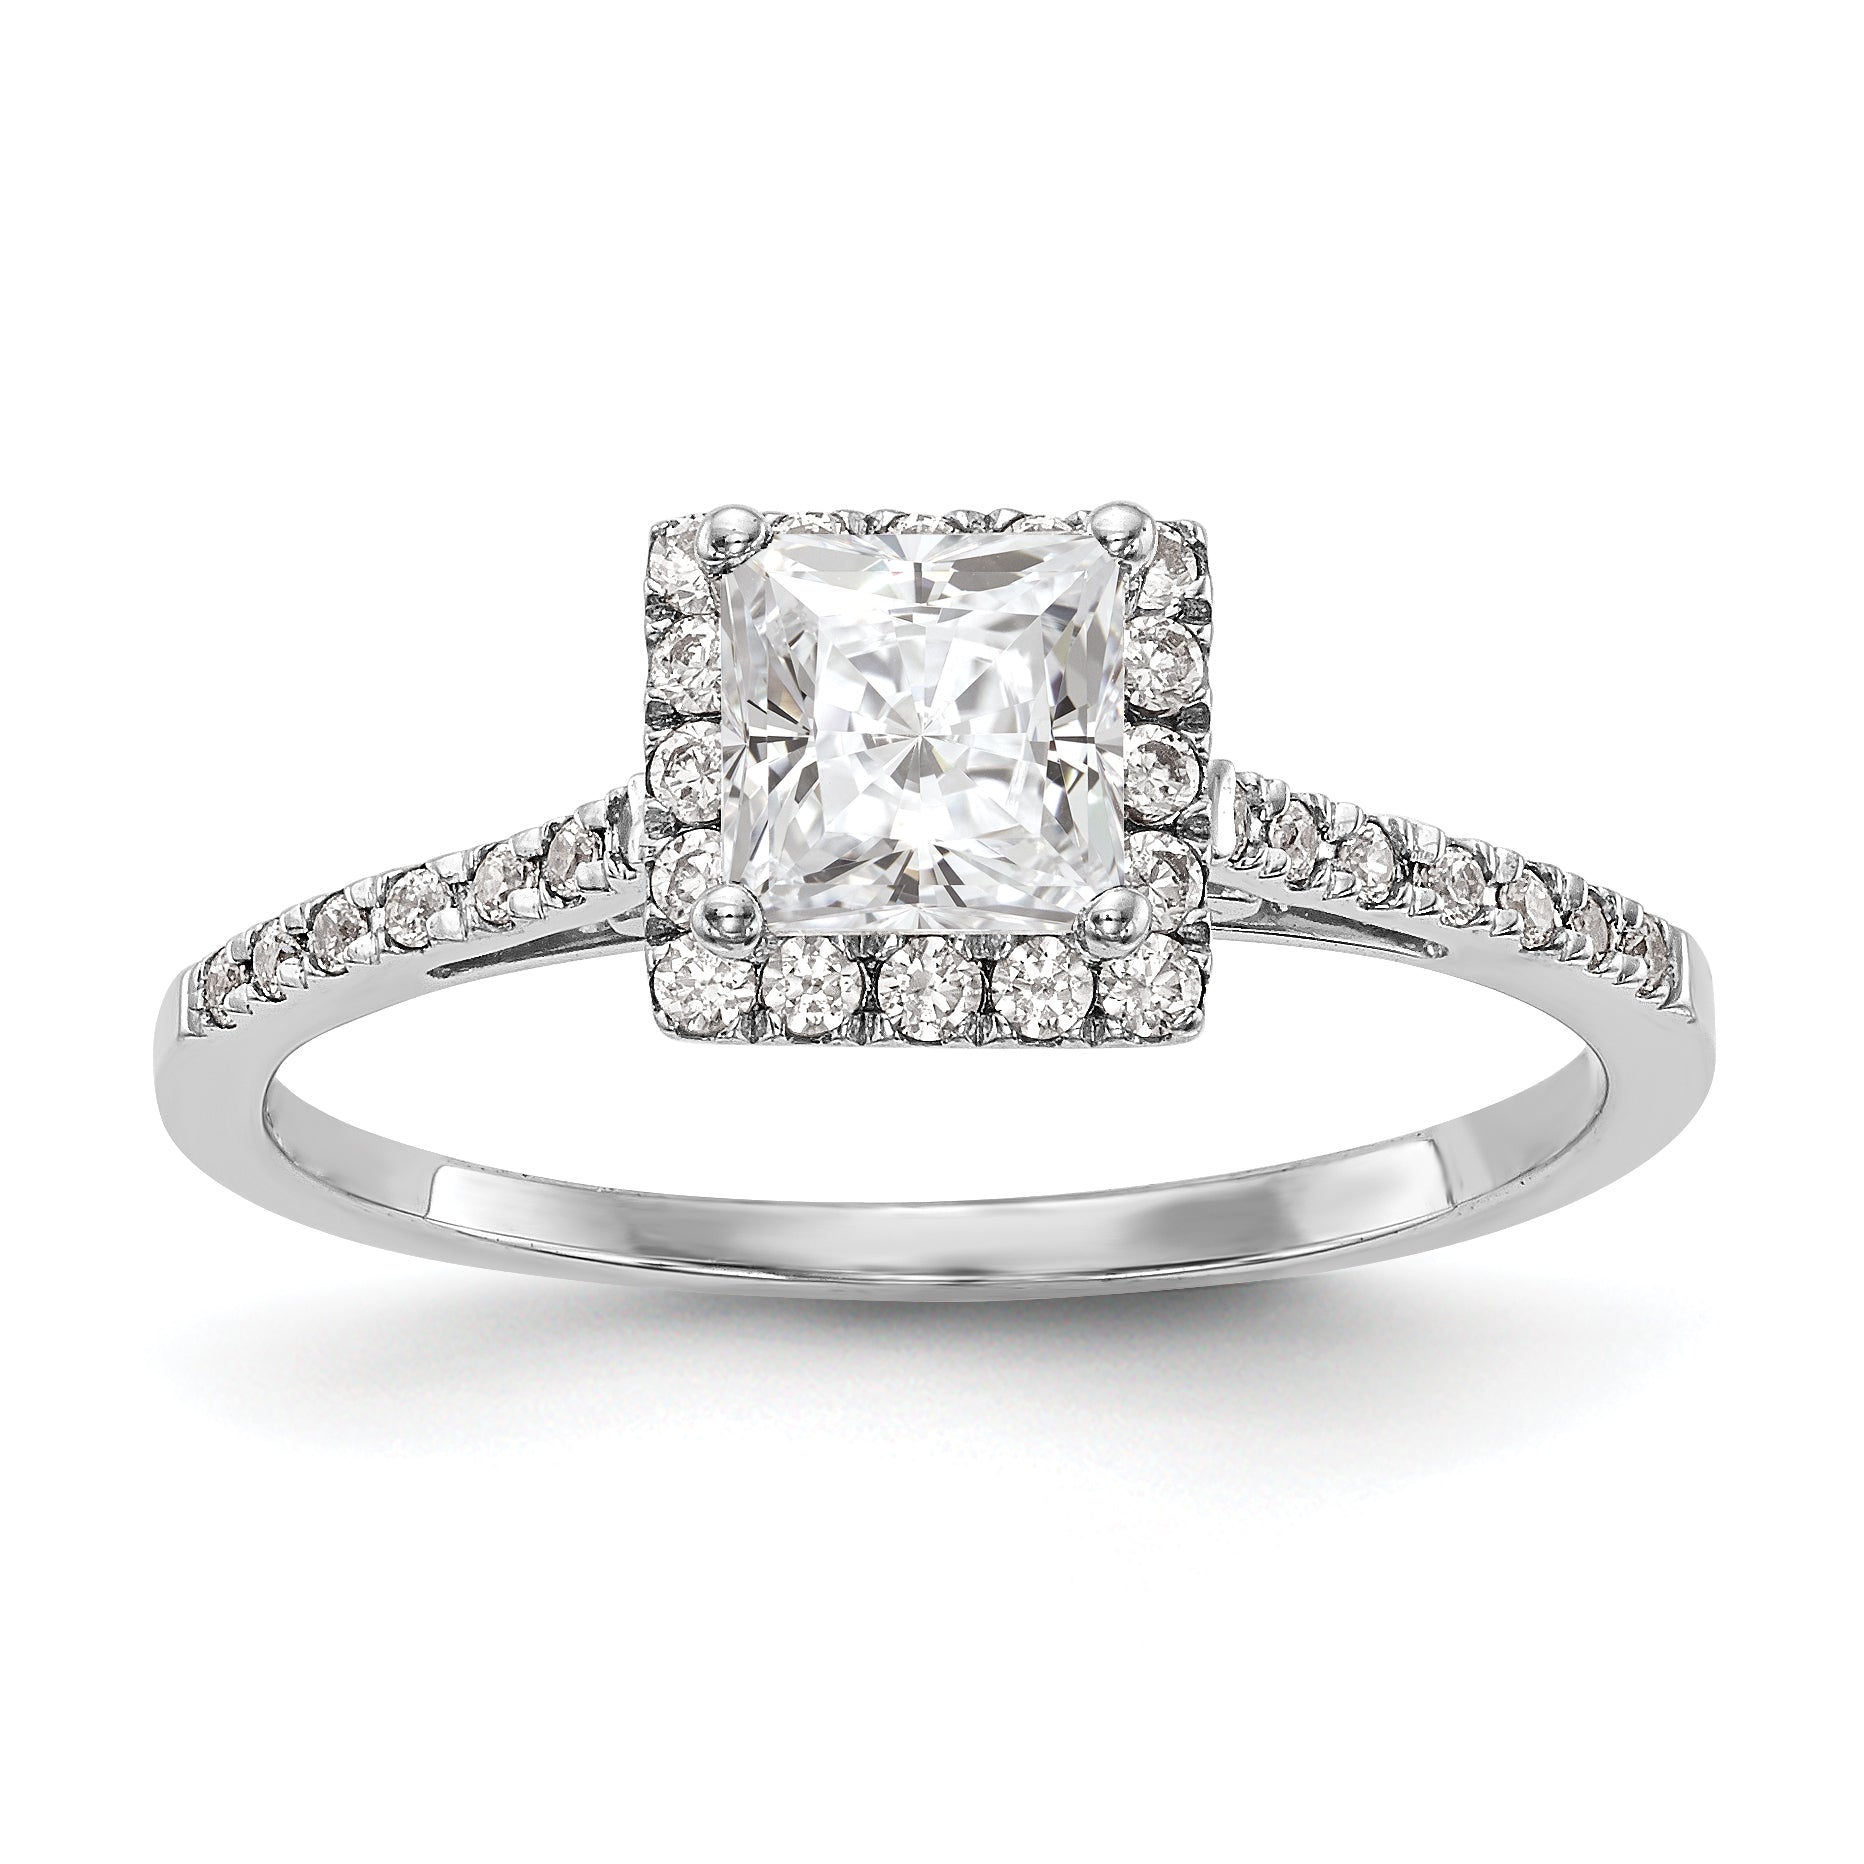 Image of ID 1 1/3 Ct Ct Natural Princess Cut Diamond Semi-mount Engagement Ring in 14K White Gold (Center Diamond is not Included)